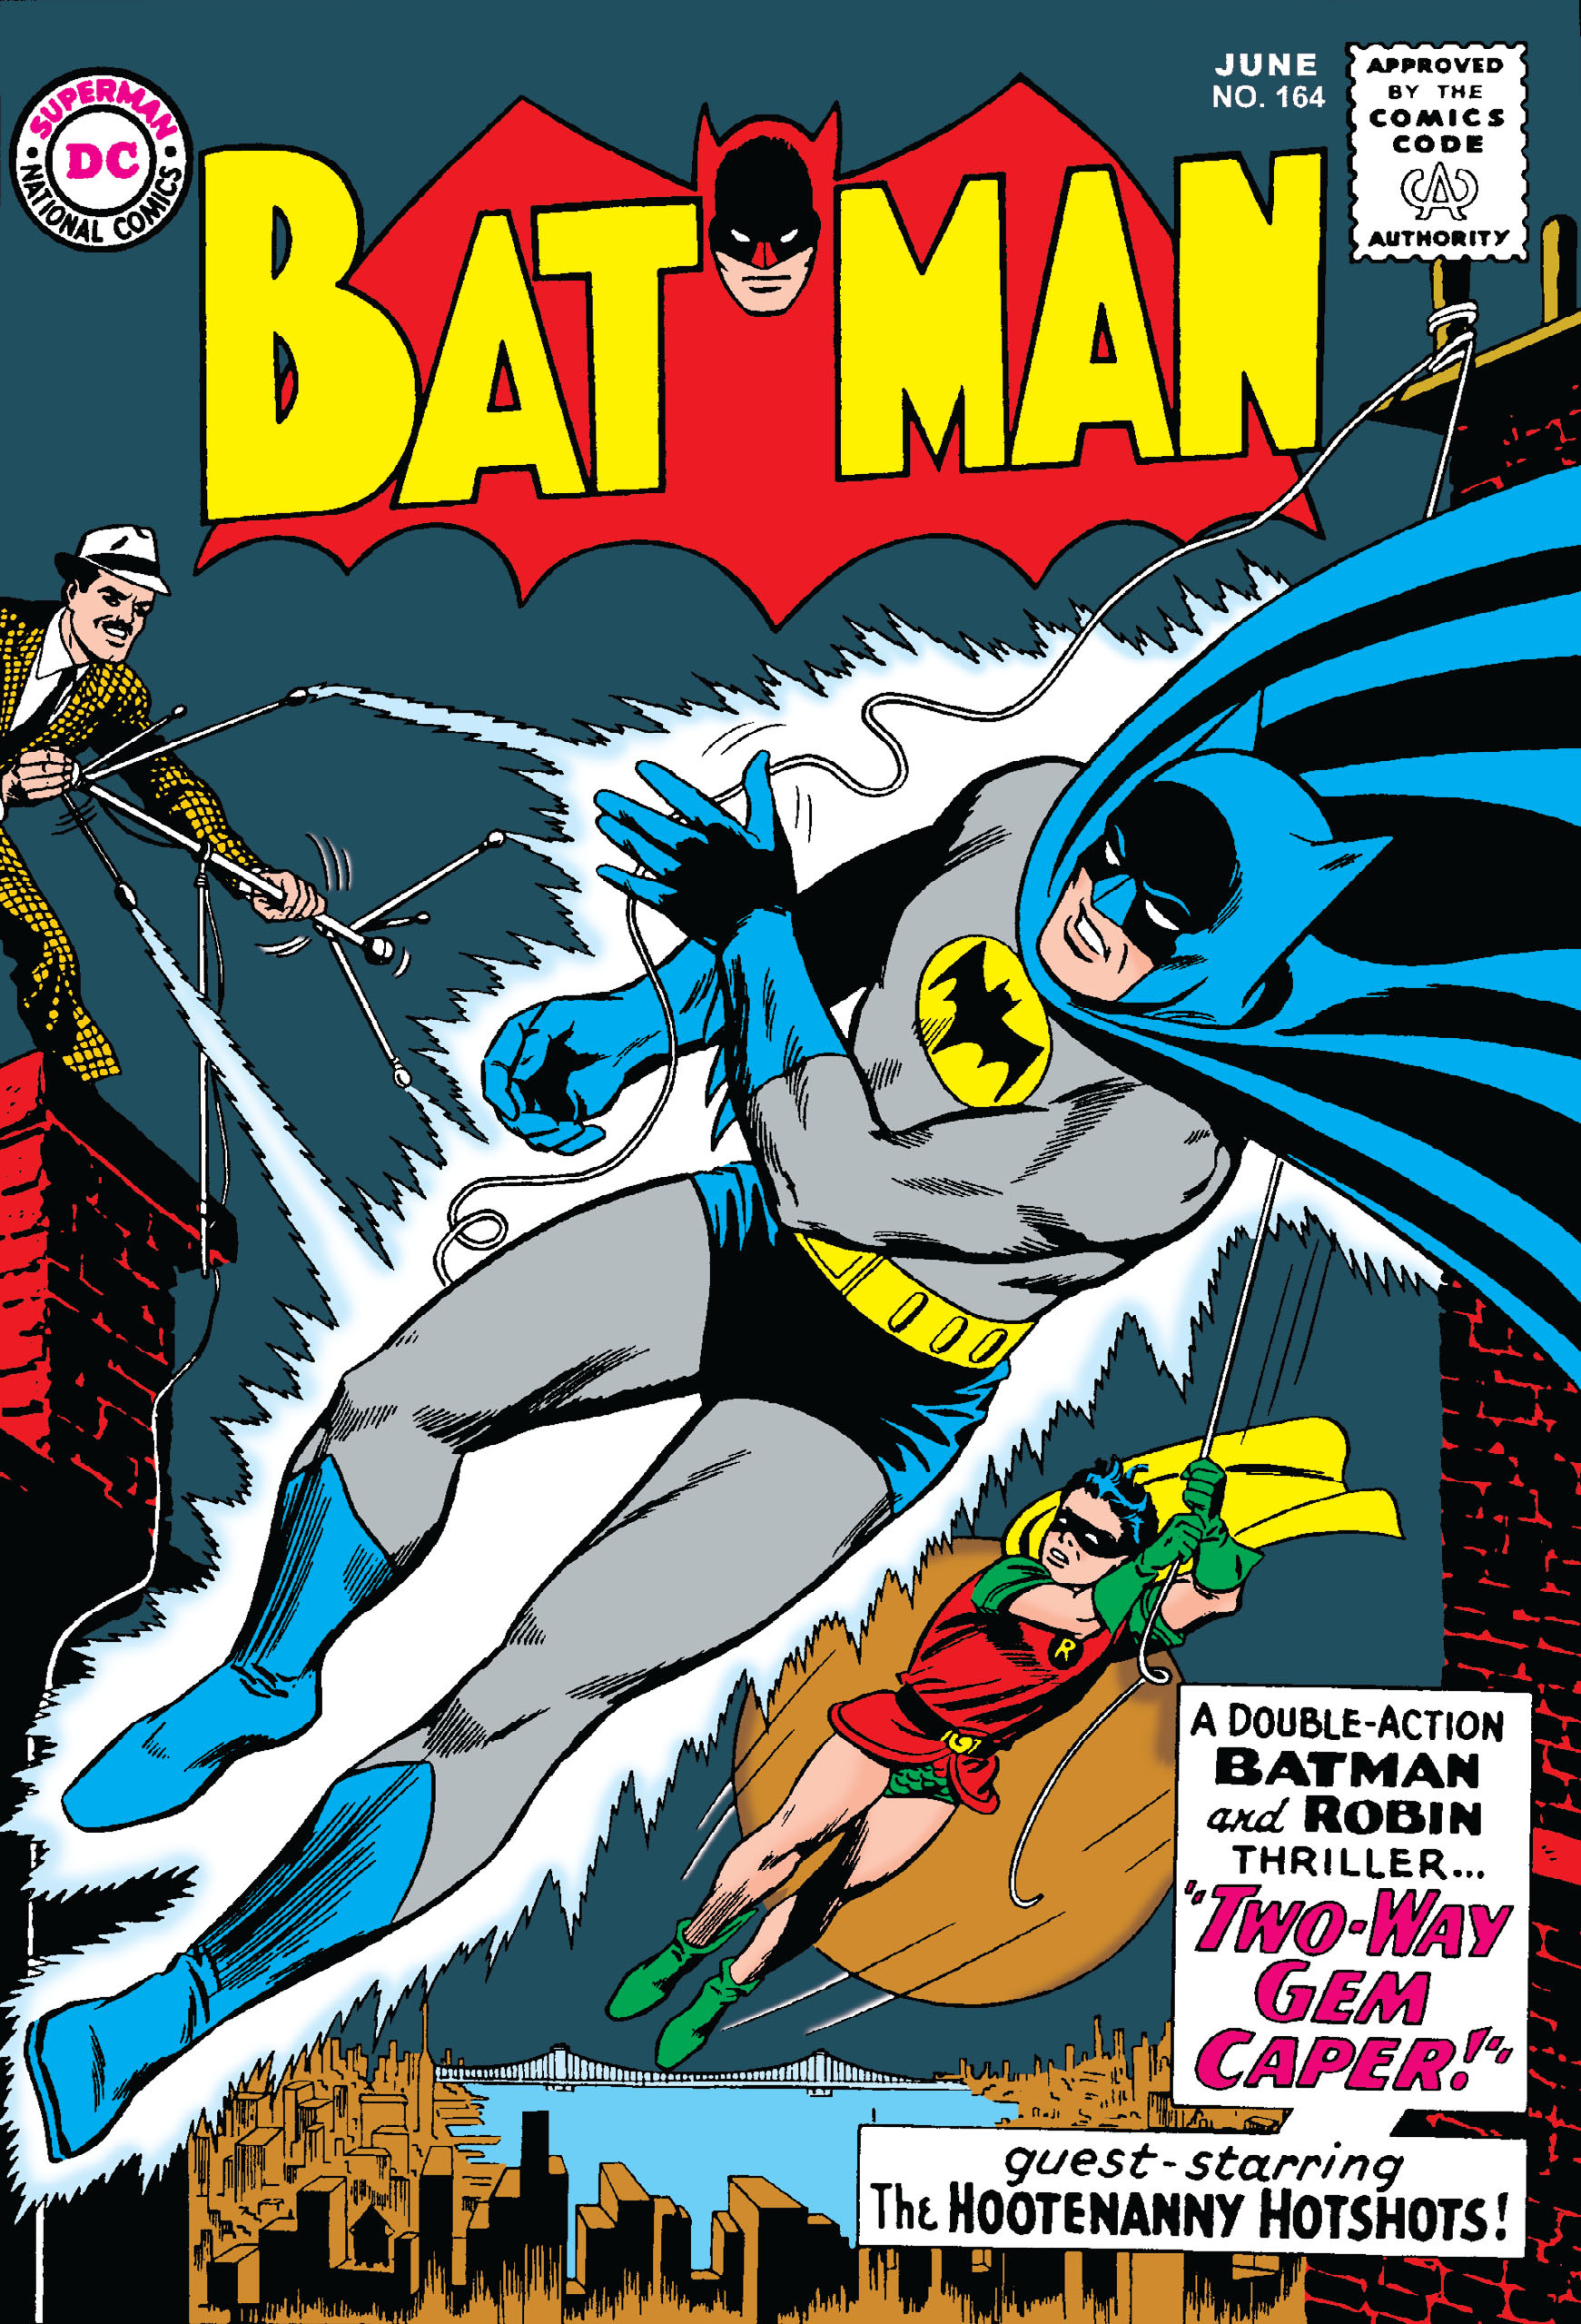 Batman 1940 Issue 164 | Read Batman 1940 Issue 164 comic online in high  quality. Read Full Comic online for free - Read comics online in high  quality .| READ COMIC ONLINE